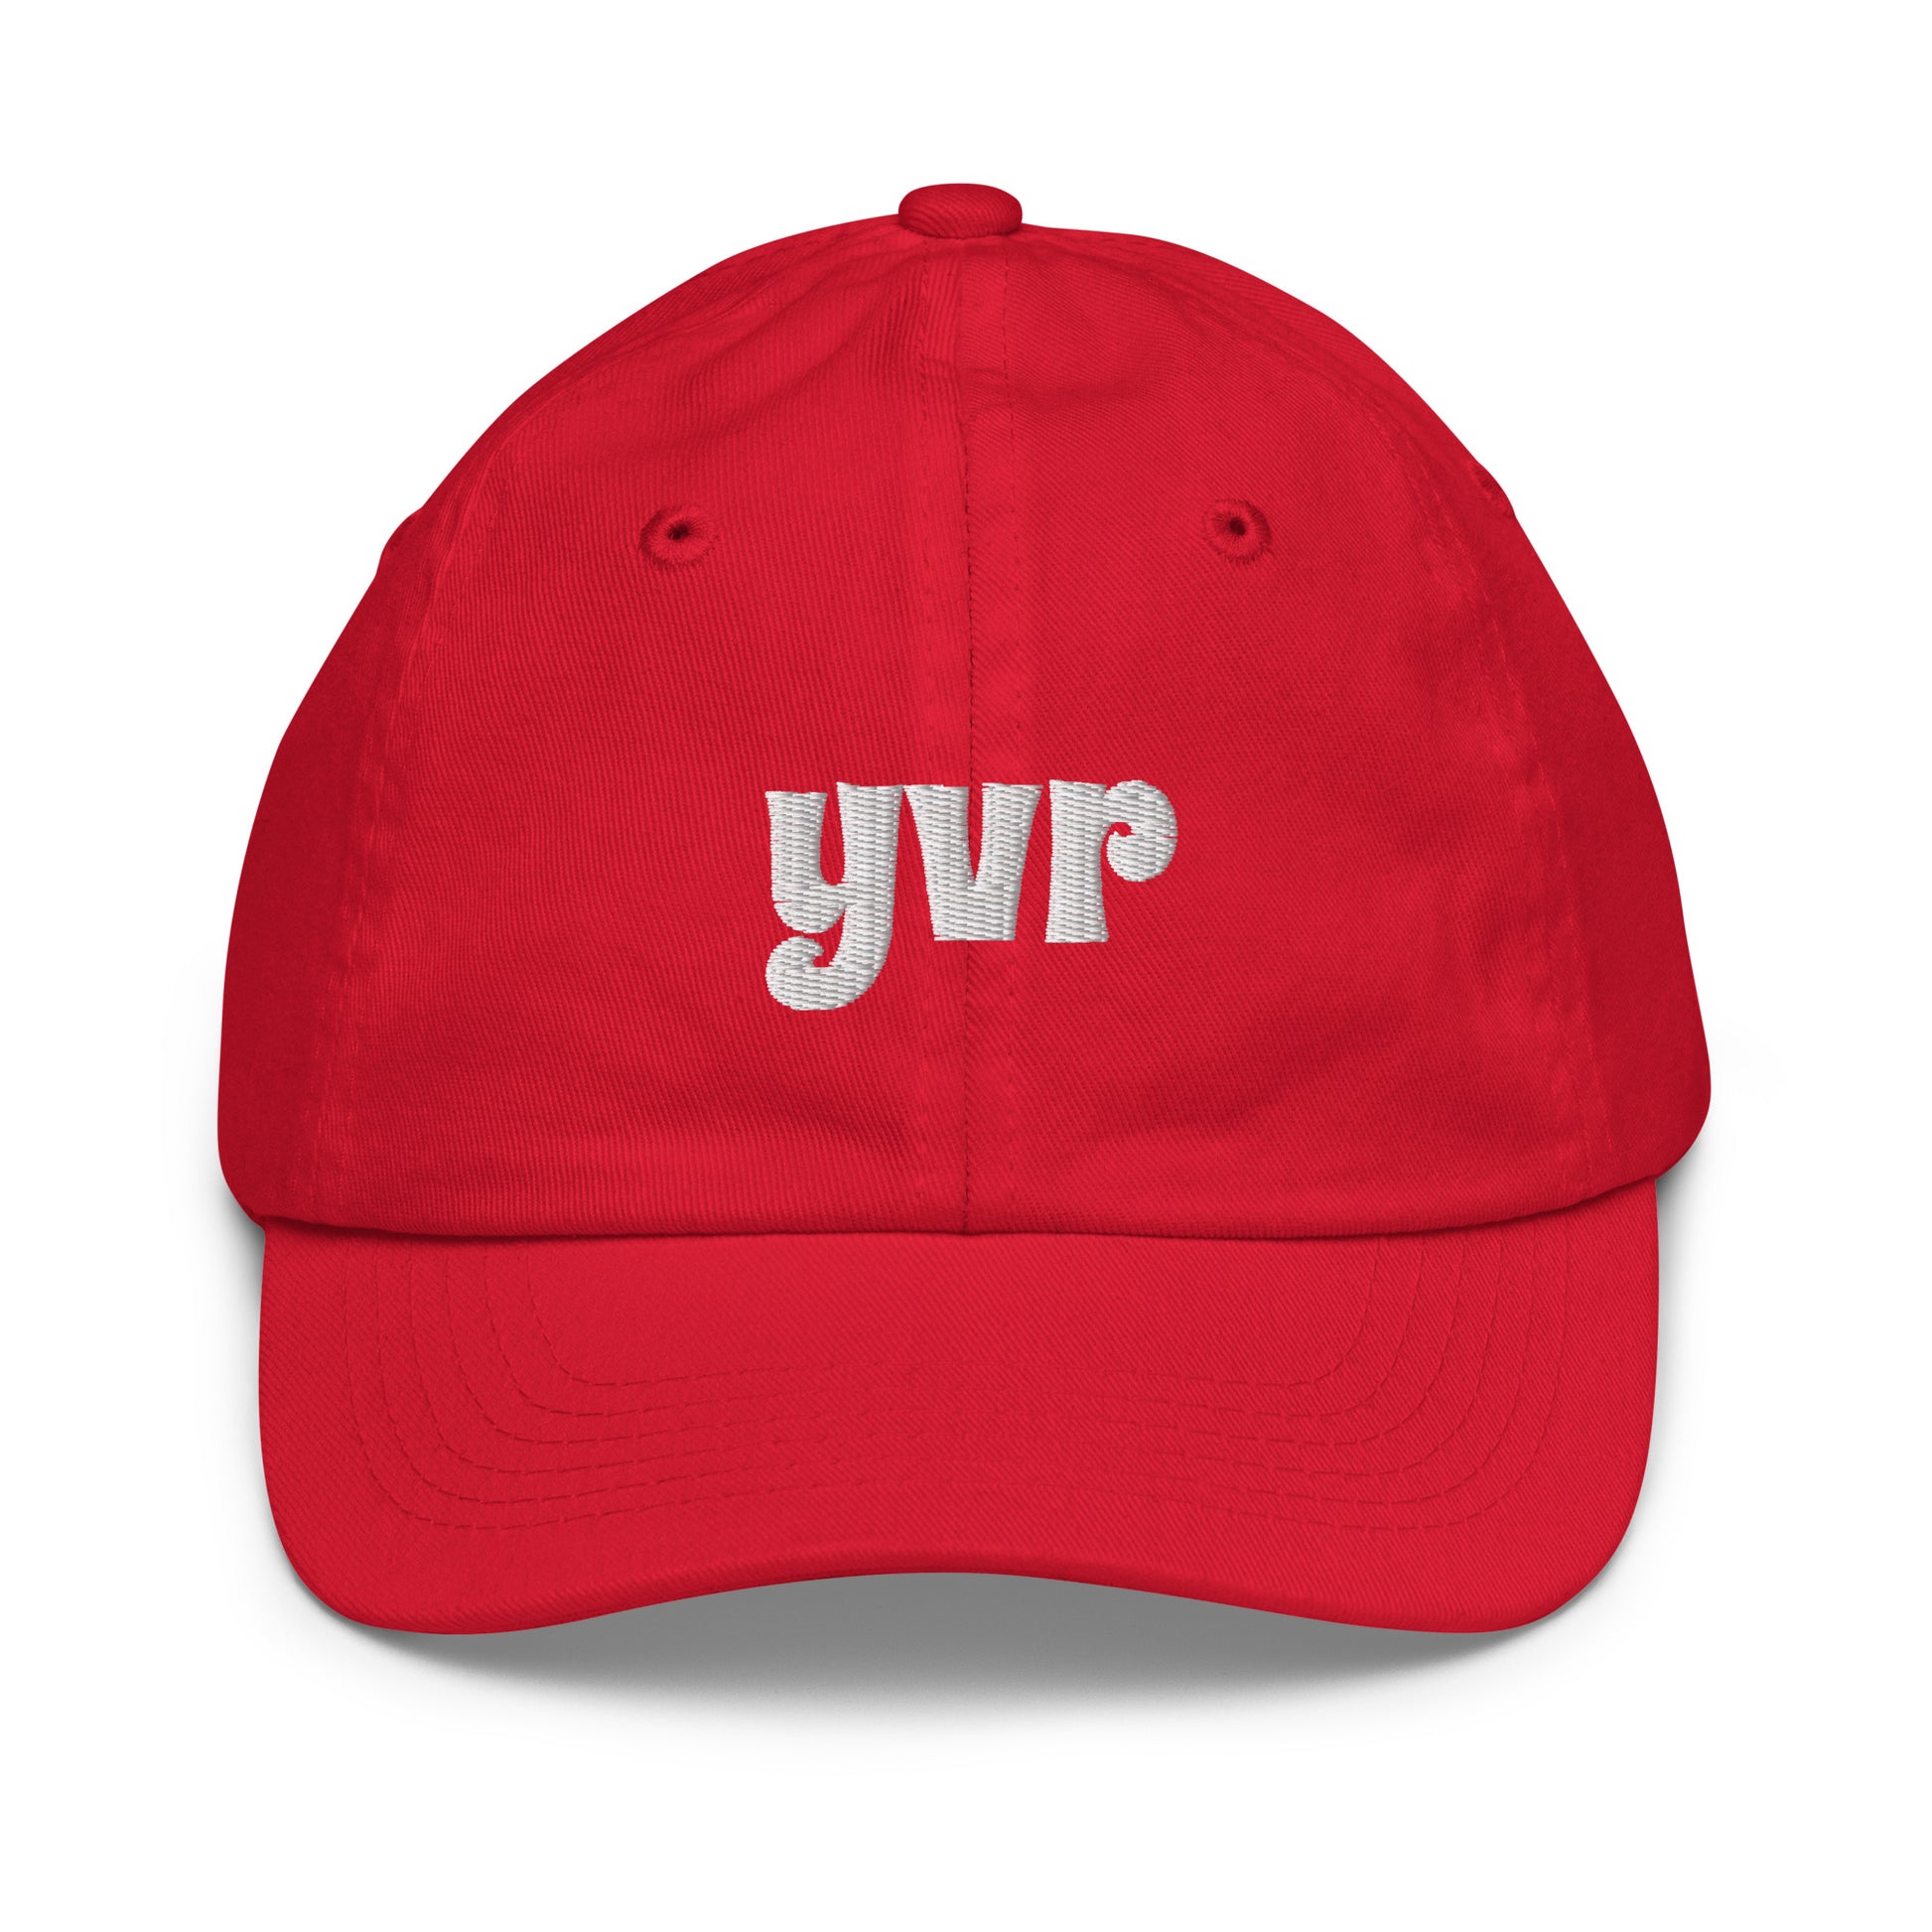 Groovy Kid's Baseball Cap - White • YVR Vancouver • YHM Designs - Image 13